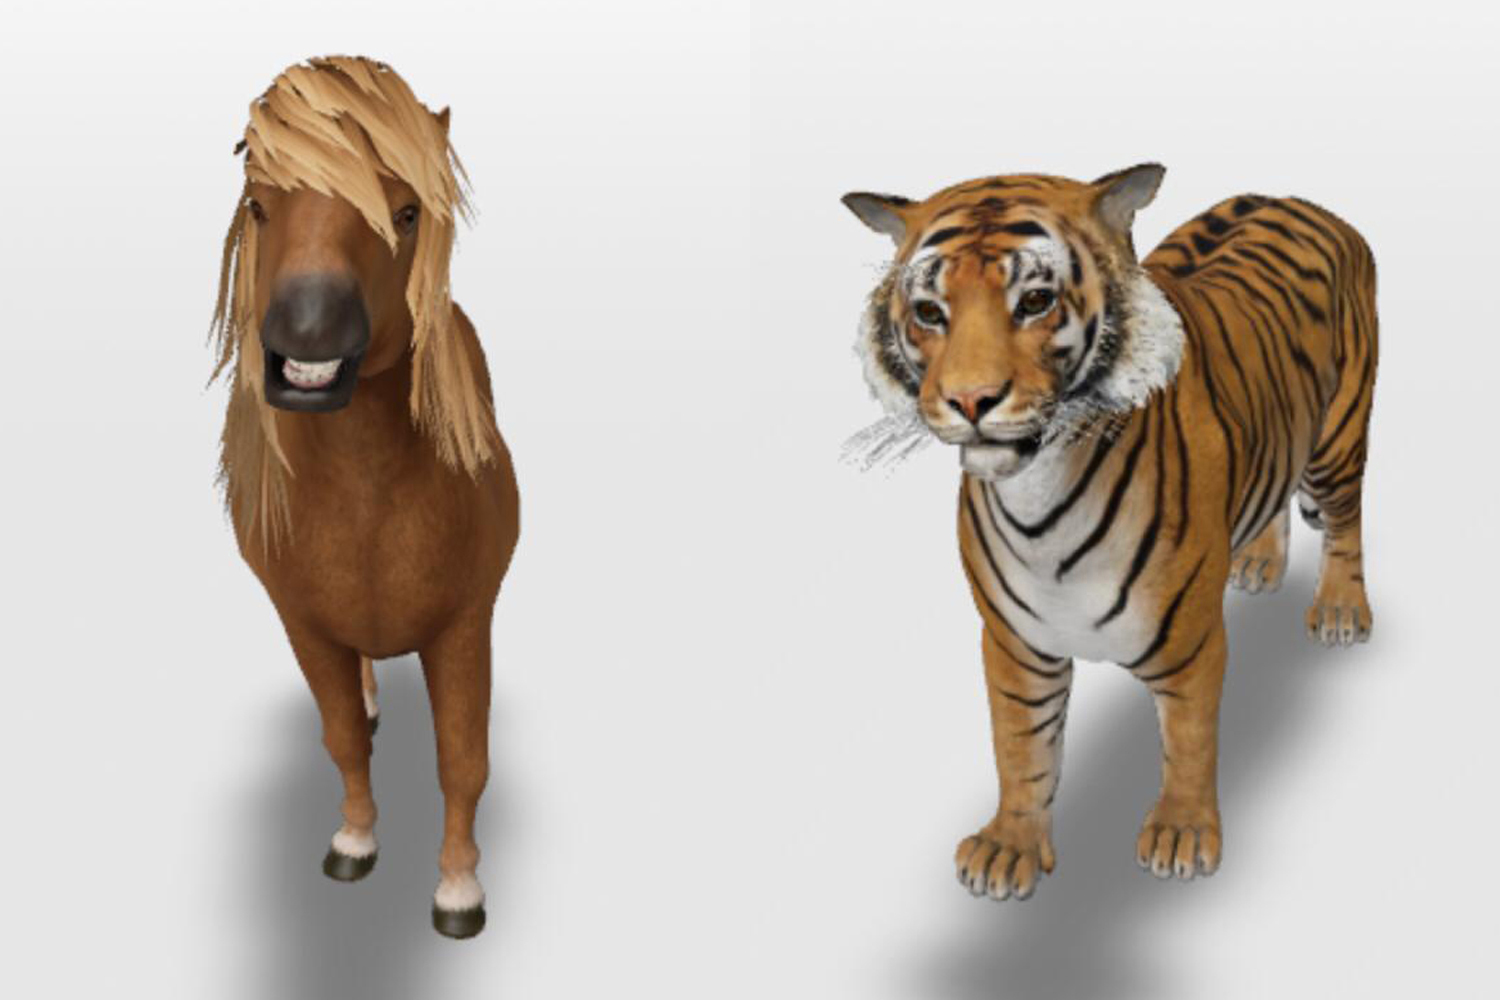 Kids getting bored? They're going to love Google's new 3D animal